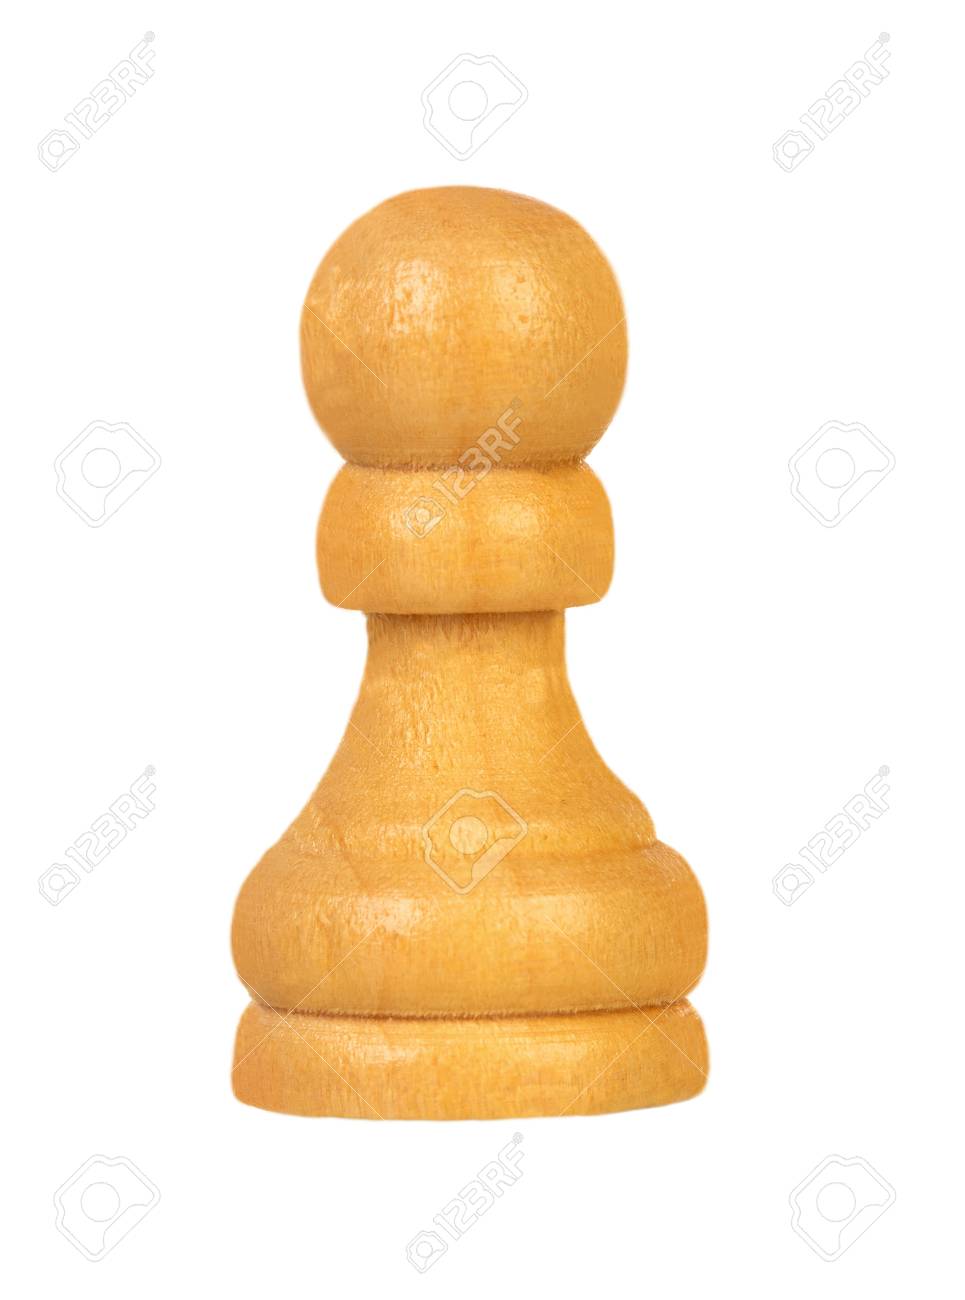 The Pawn Chess Piece Isolated On A White Background Stock Photo